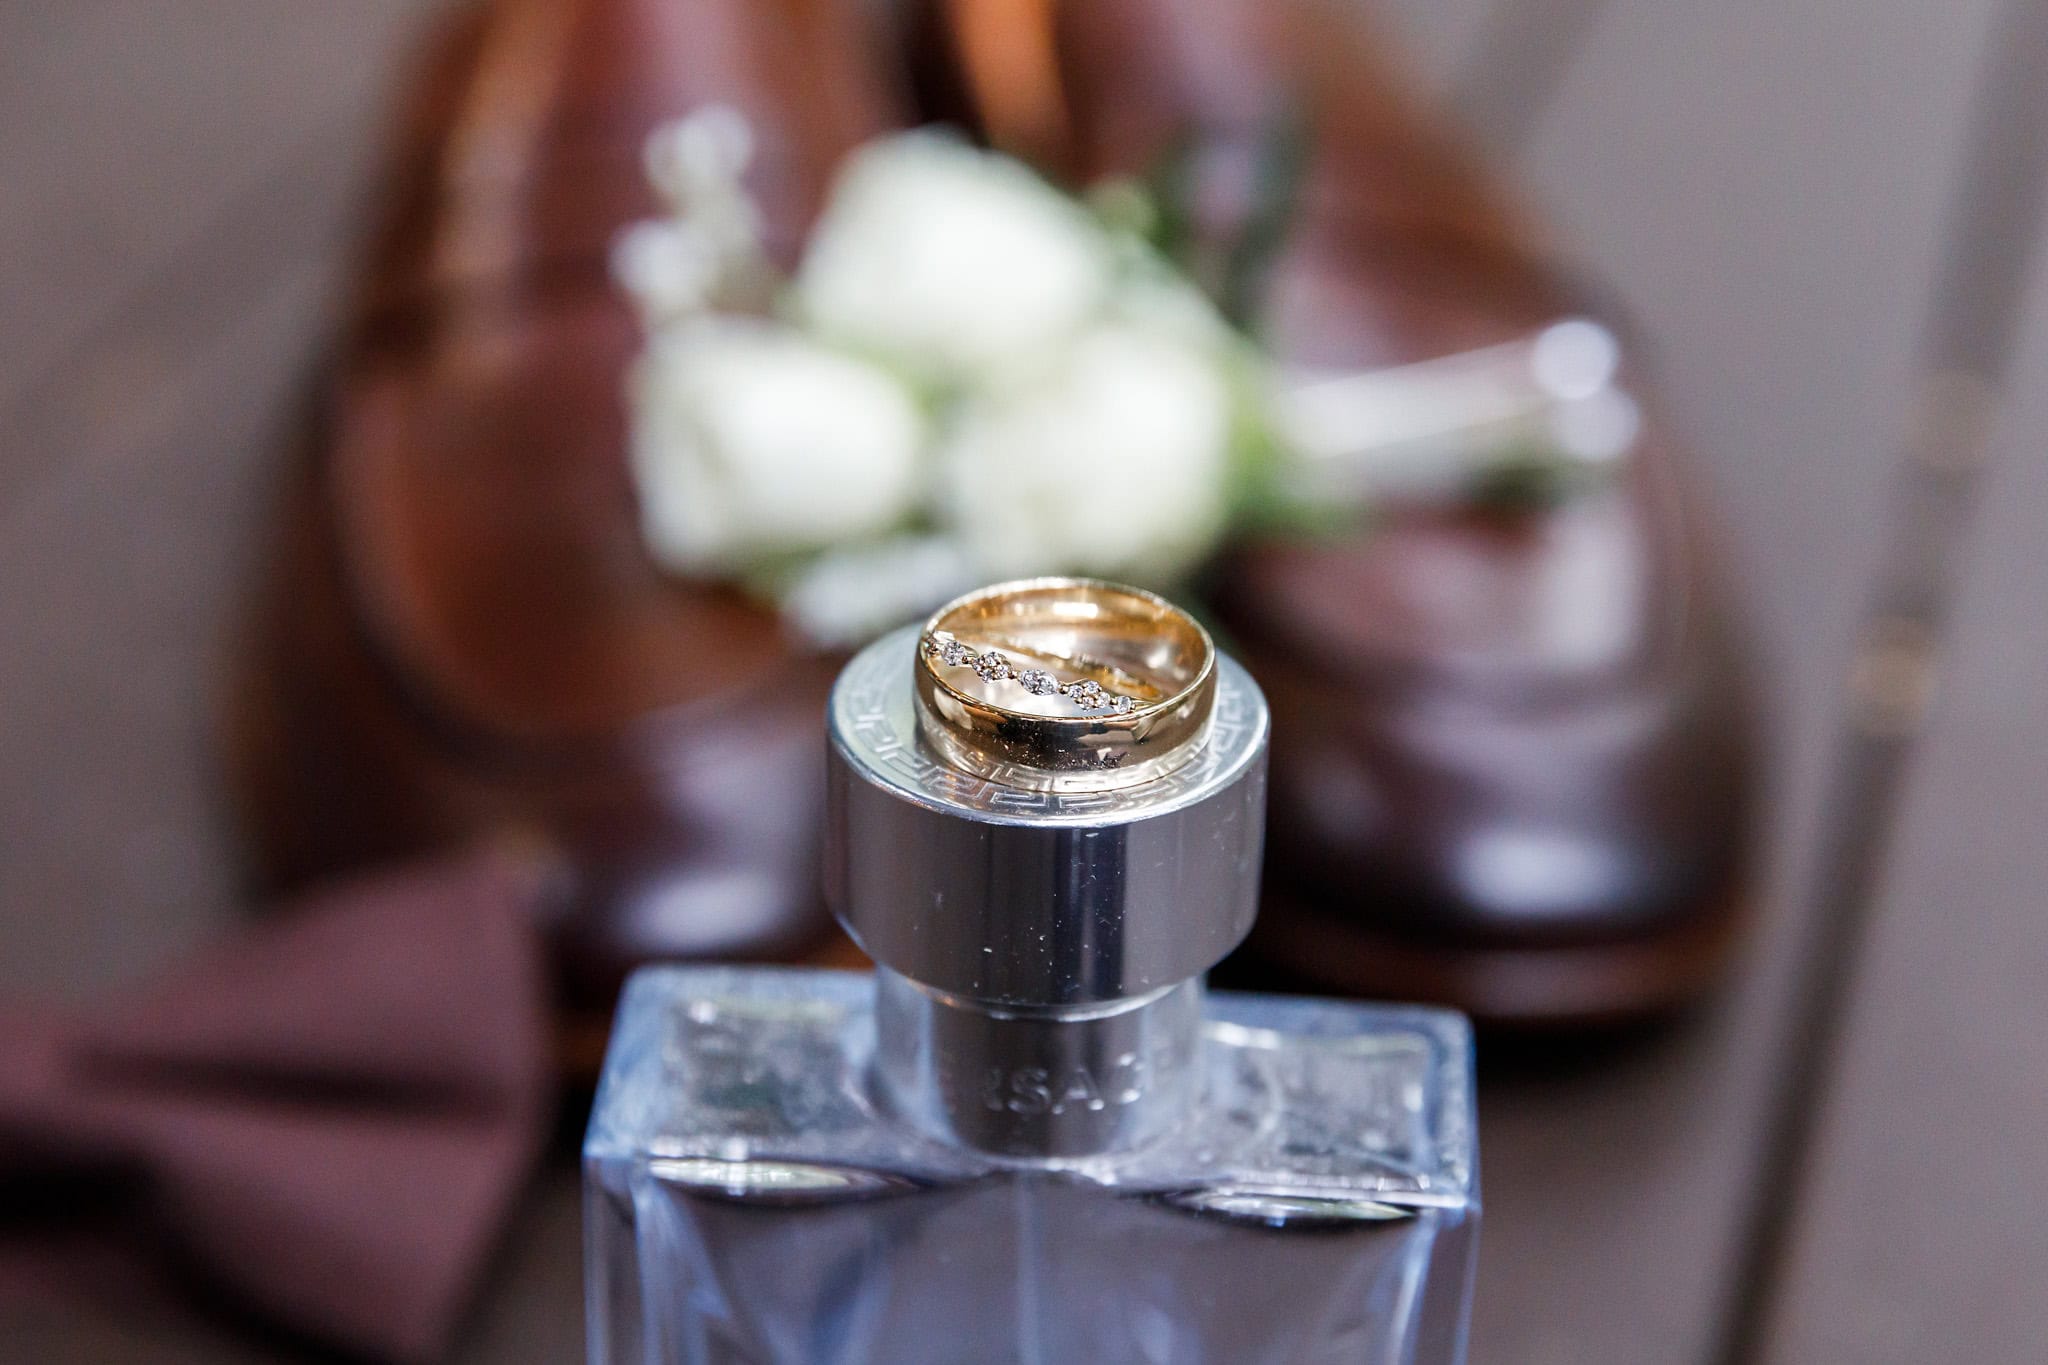 Groom wedding details by Mooi Phtography.